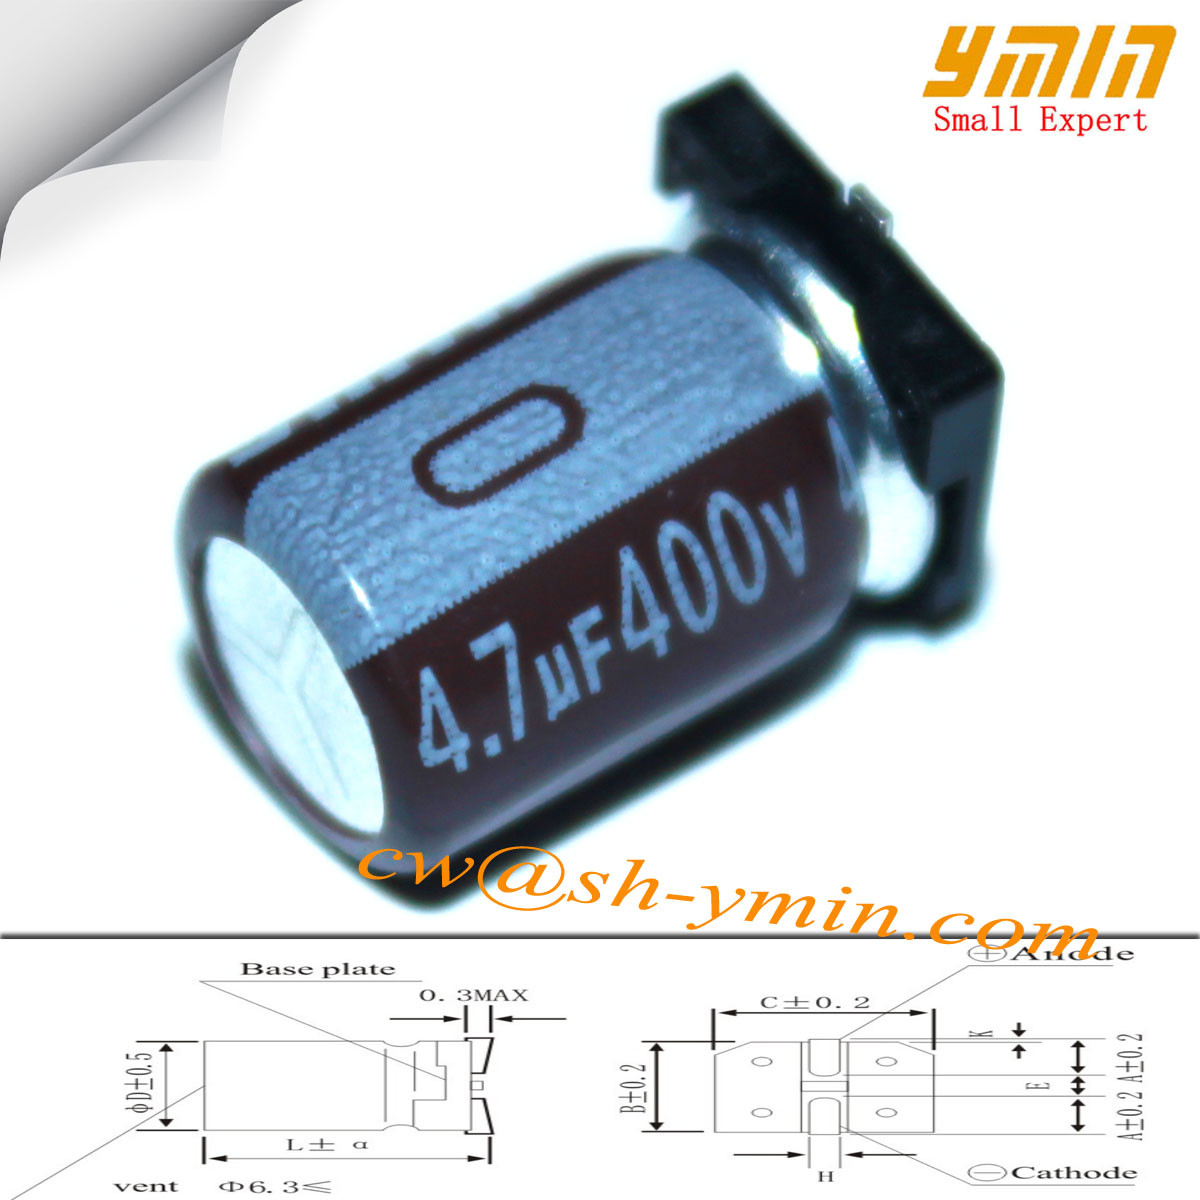  400V 4.7uF 8x12.5mm SMD Capacitors VKO Series 105°C 6,000 ~ 8,000 Hours SMD Aluminum Electrolytic Capacitor  RoHS Manufactures